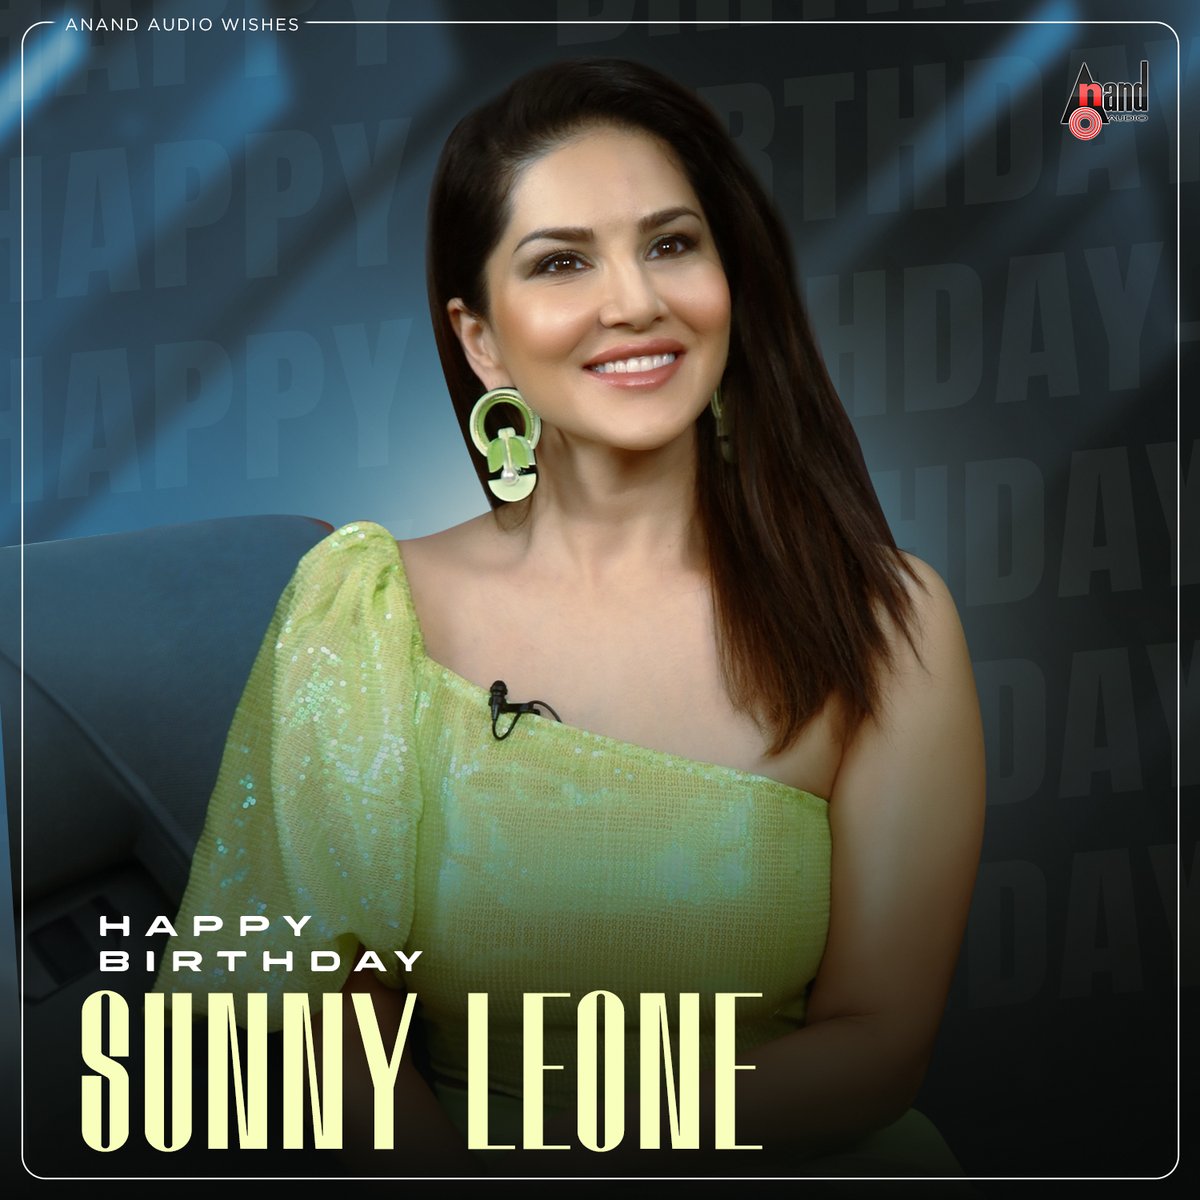 Wishing You The Most Joyous Birthday! Have A Great Year With Loads Of Happy Memories. Pleasant Birthday Gorgeous @SunnyLeone Ma'am 😍💝🎂 youtu.be/9jGA-q8WuzY #sunnyleone #happybirthday #birthdaywishes #AnandAudio @aanandaaudio